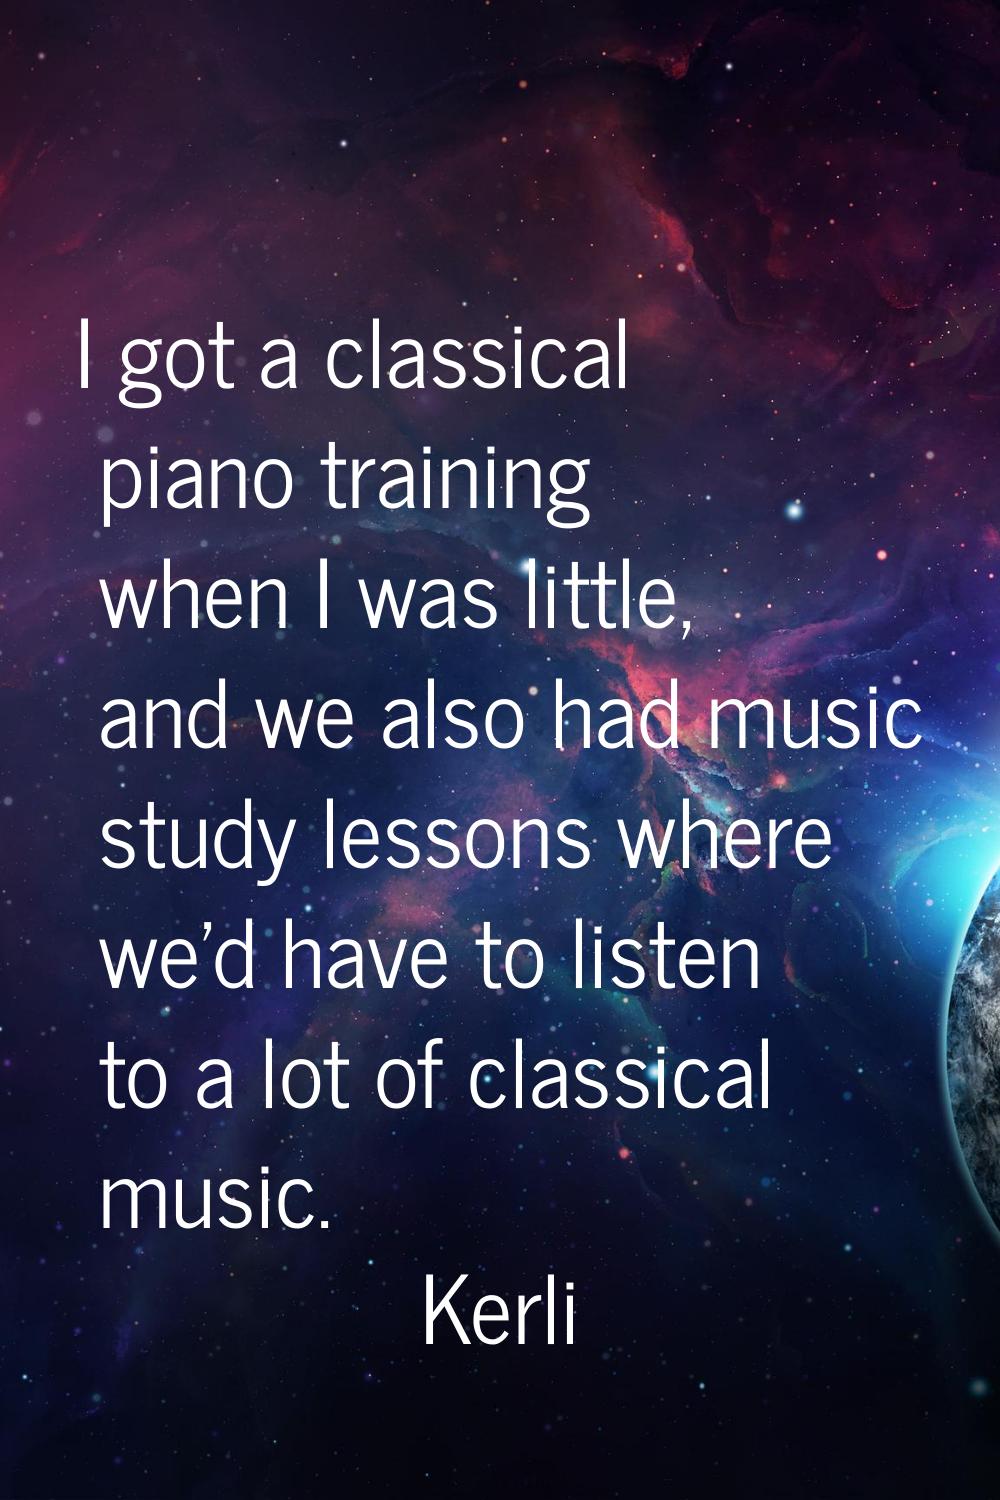 I got a classical piano training when I was little, and we also had music study lessons where we'd 